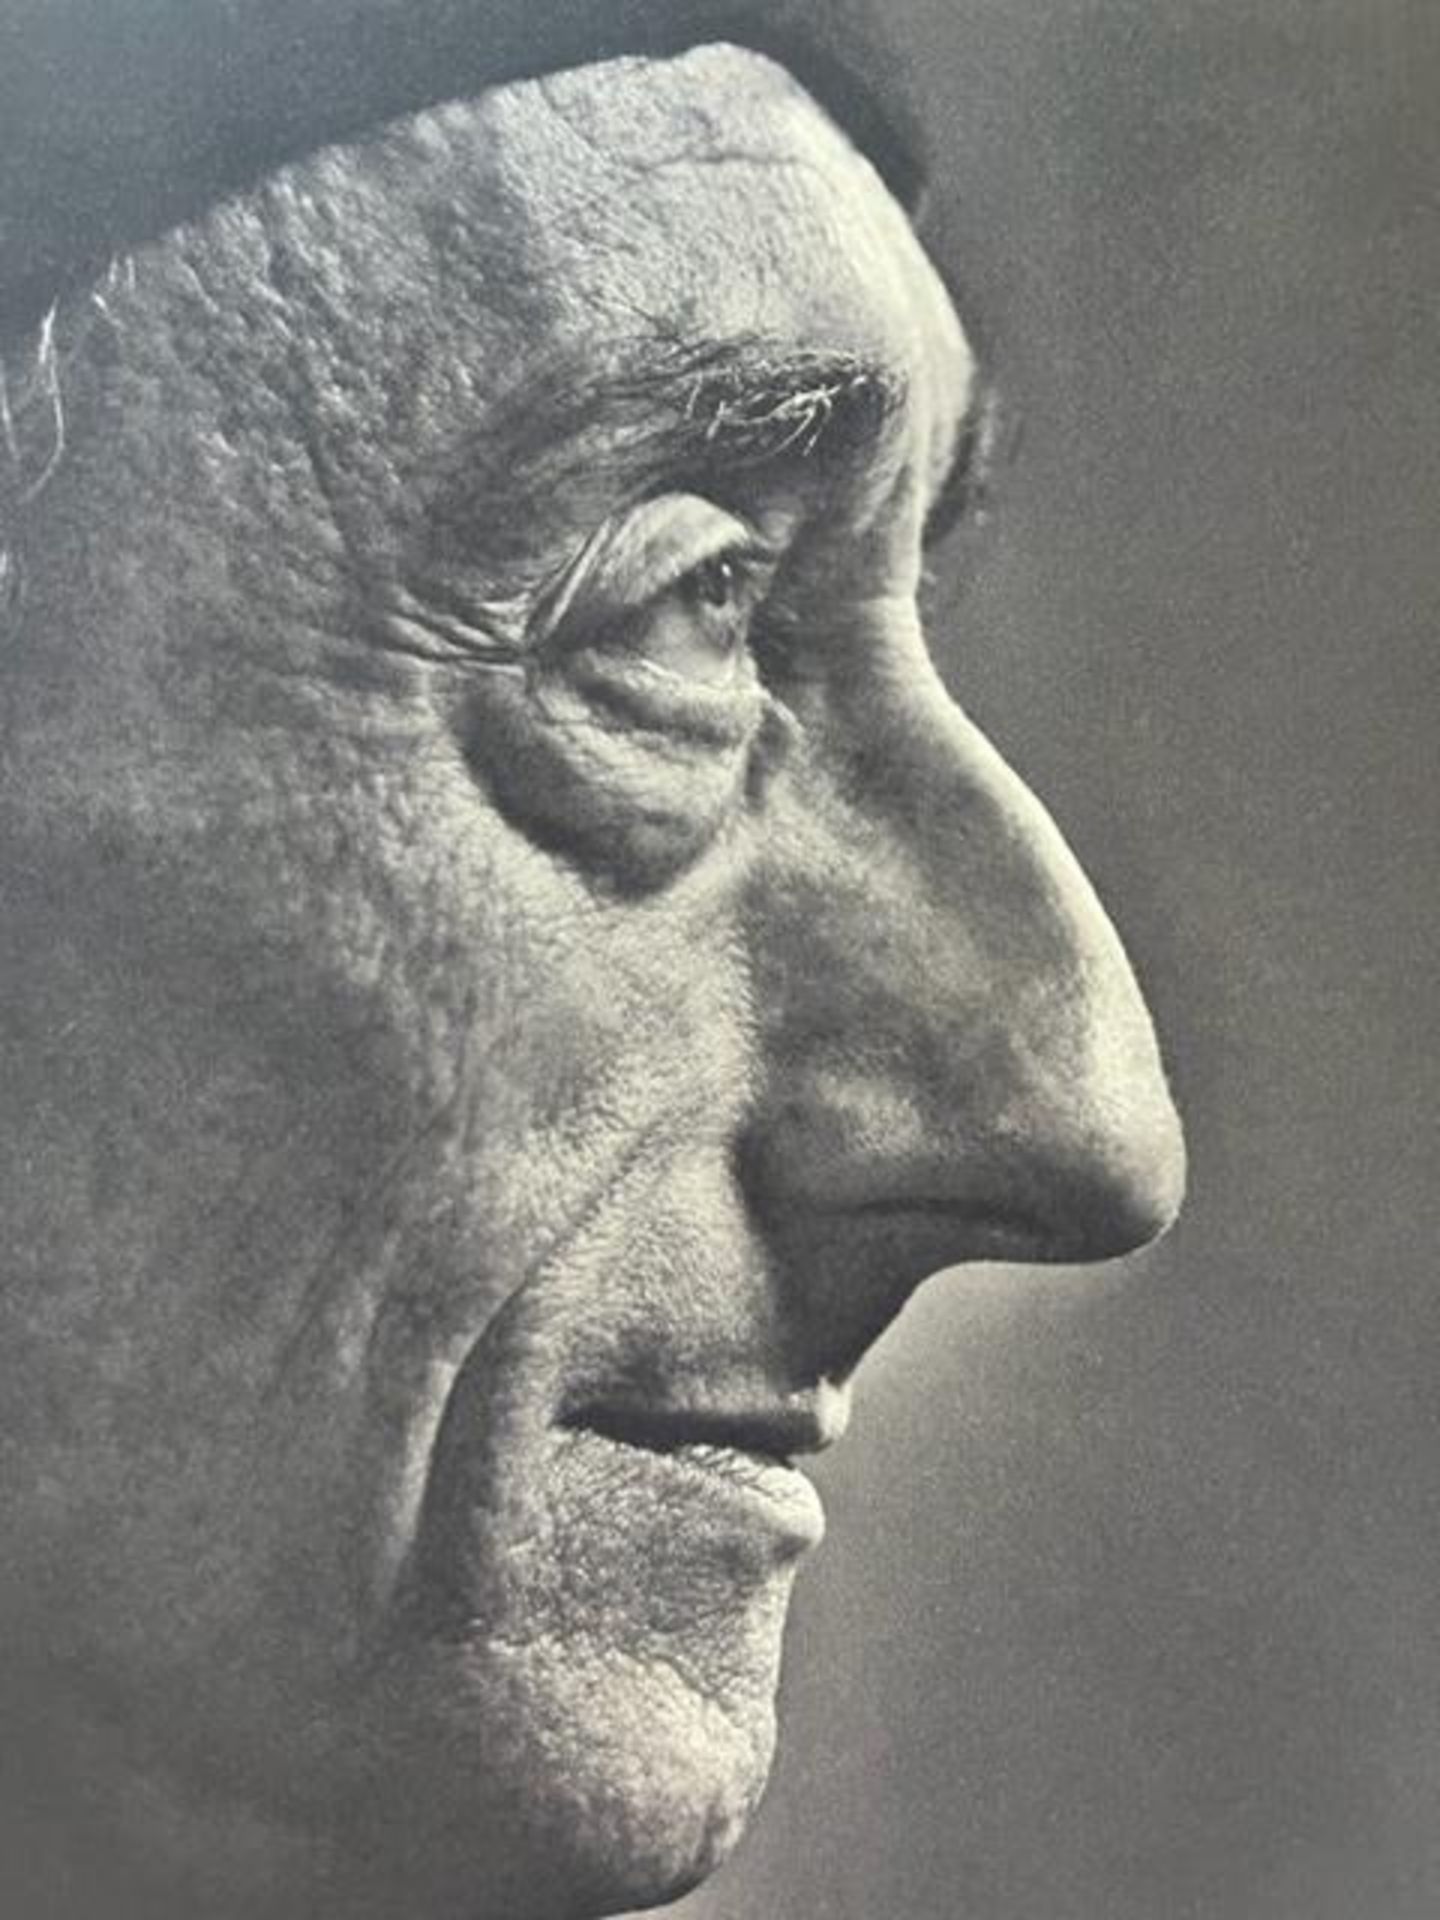 Yousuf Karsh "Jacques Cousteau" Print. - Image 2 of 6